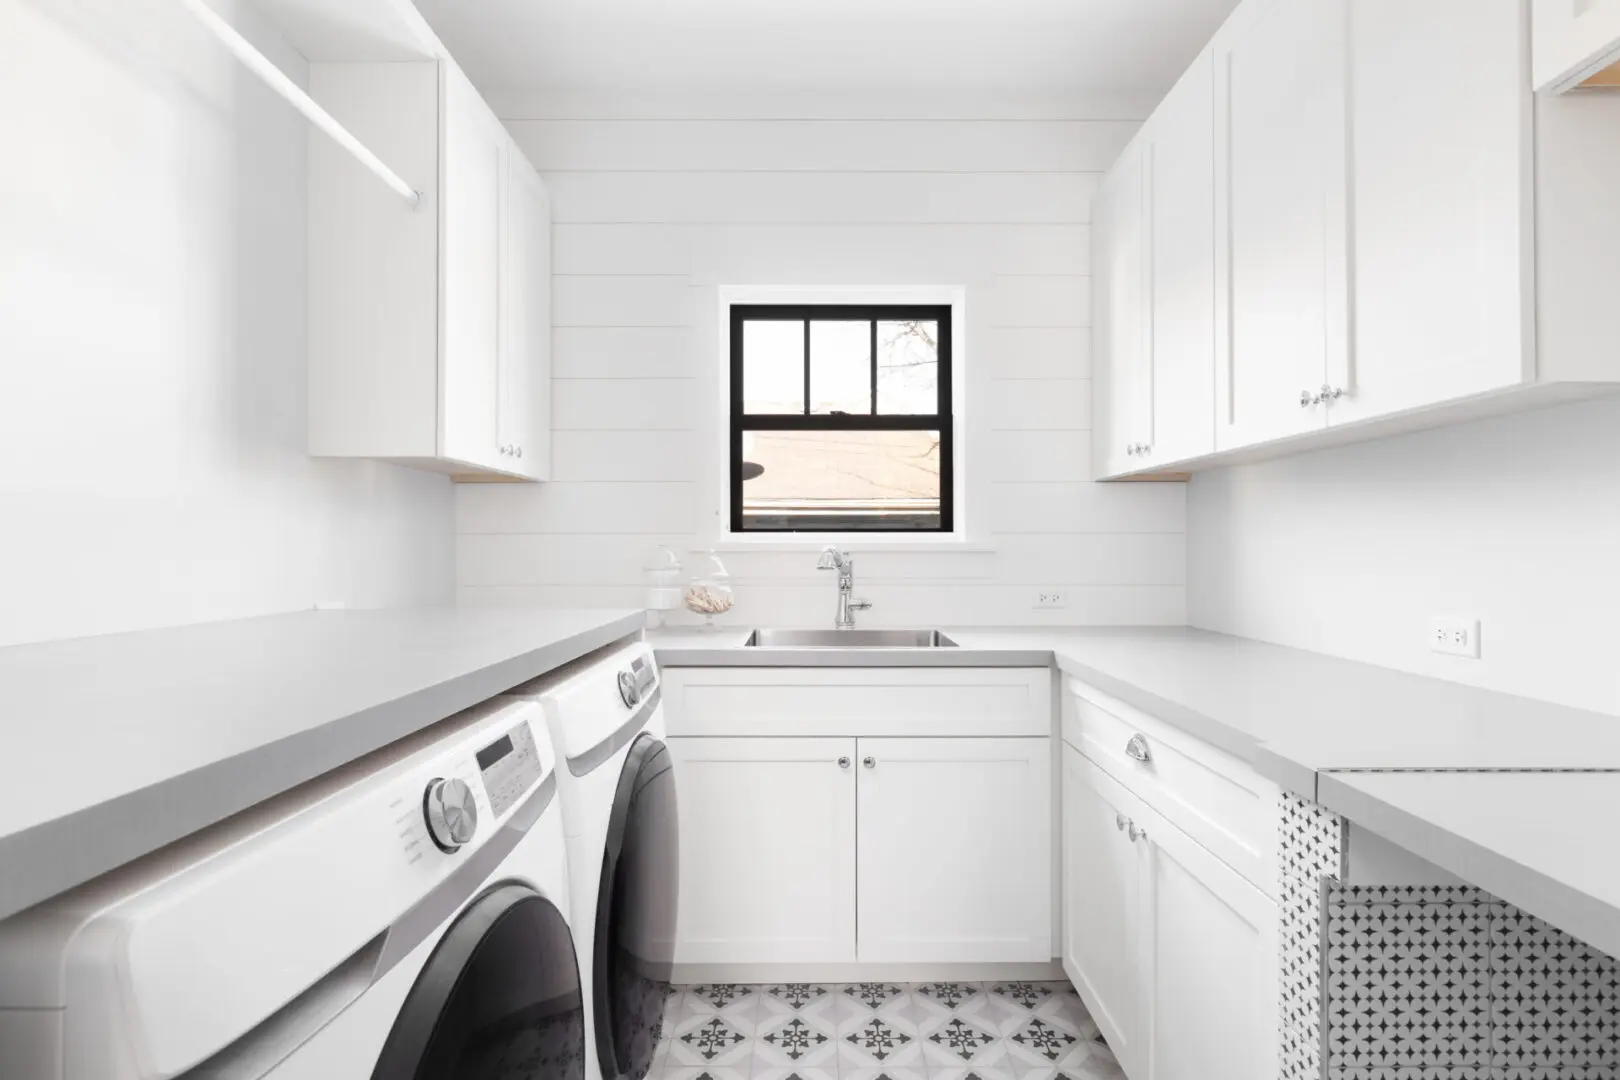 A white kitchen with a window and sink.